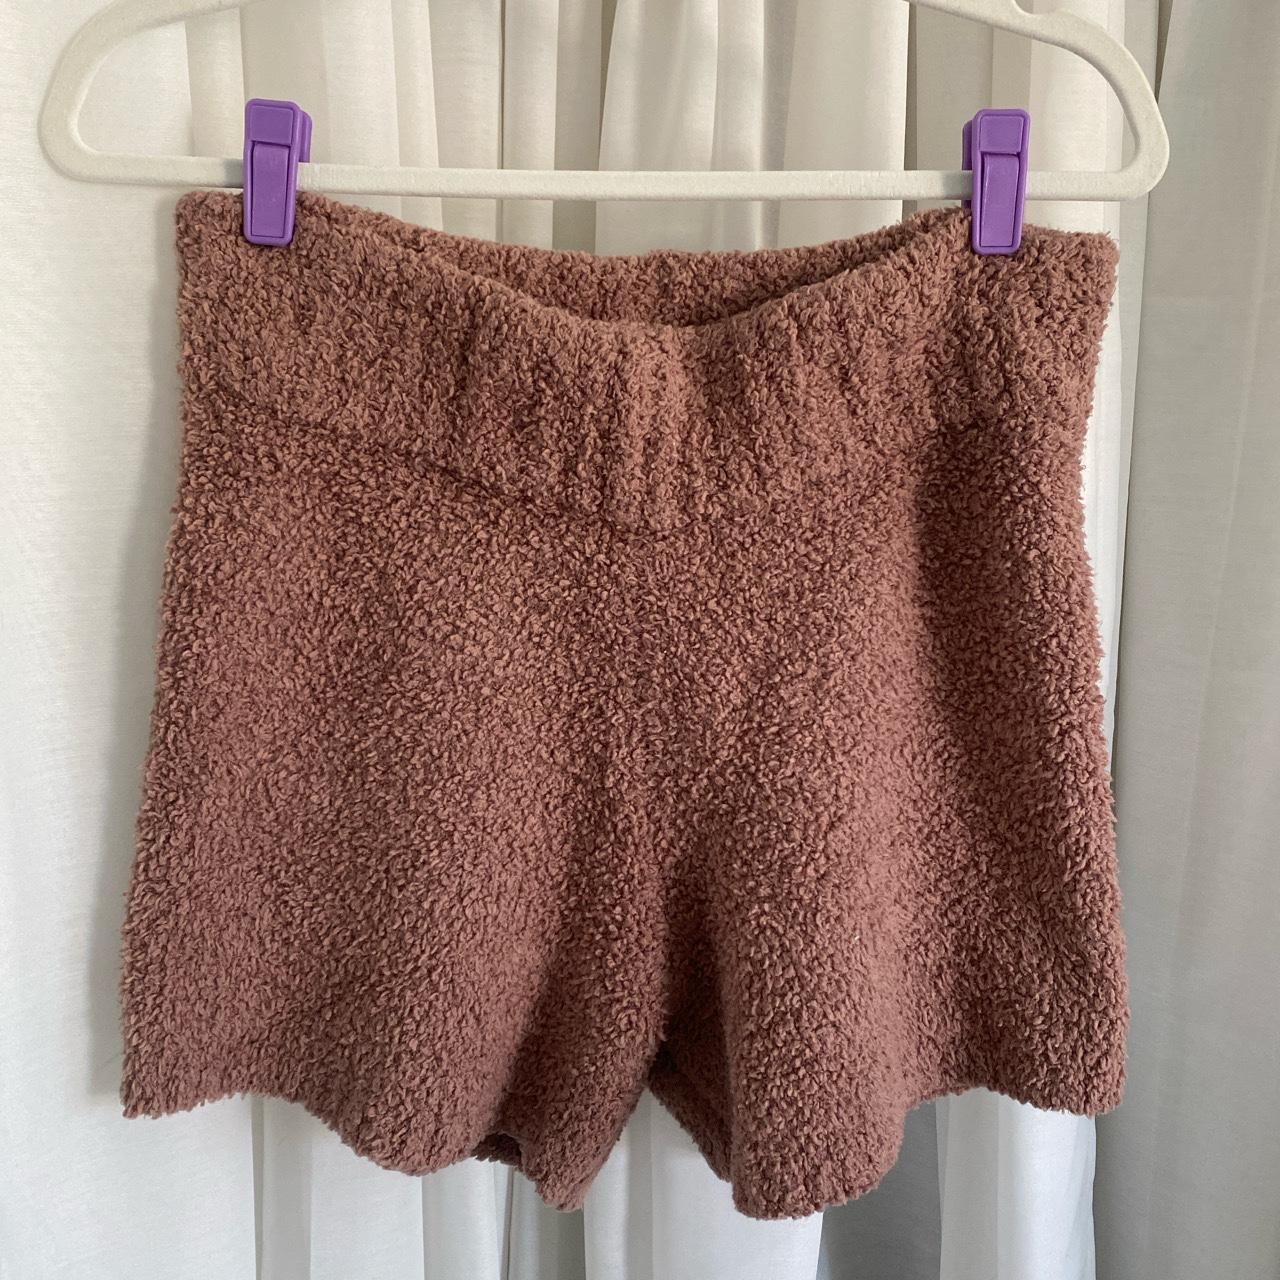 Skims Cozy Knit Shorts🤎, ✨Size Small, ✨Blush brown